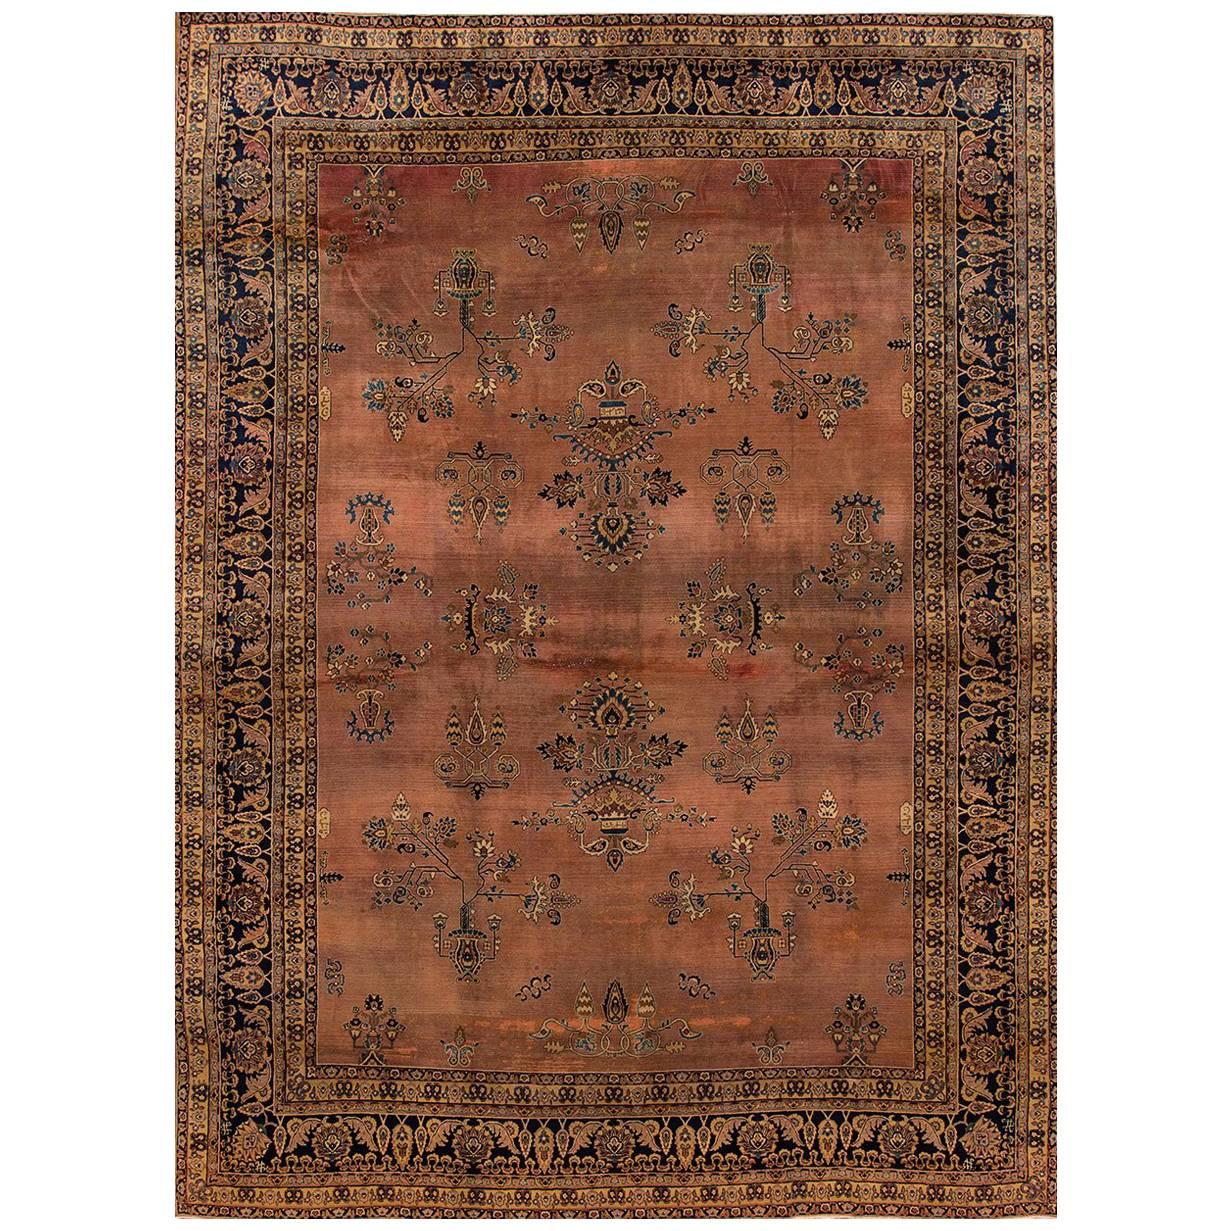 Antique Distressed Brown and Blue Persian Saroukh Rug, 8.09x11.08